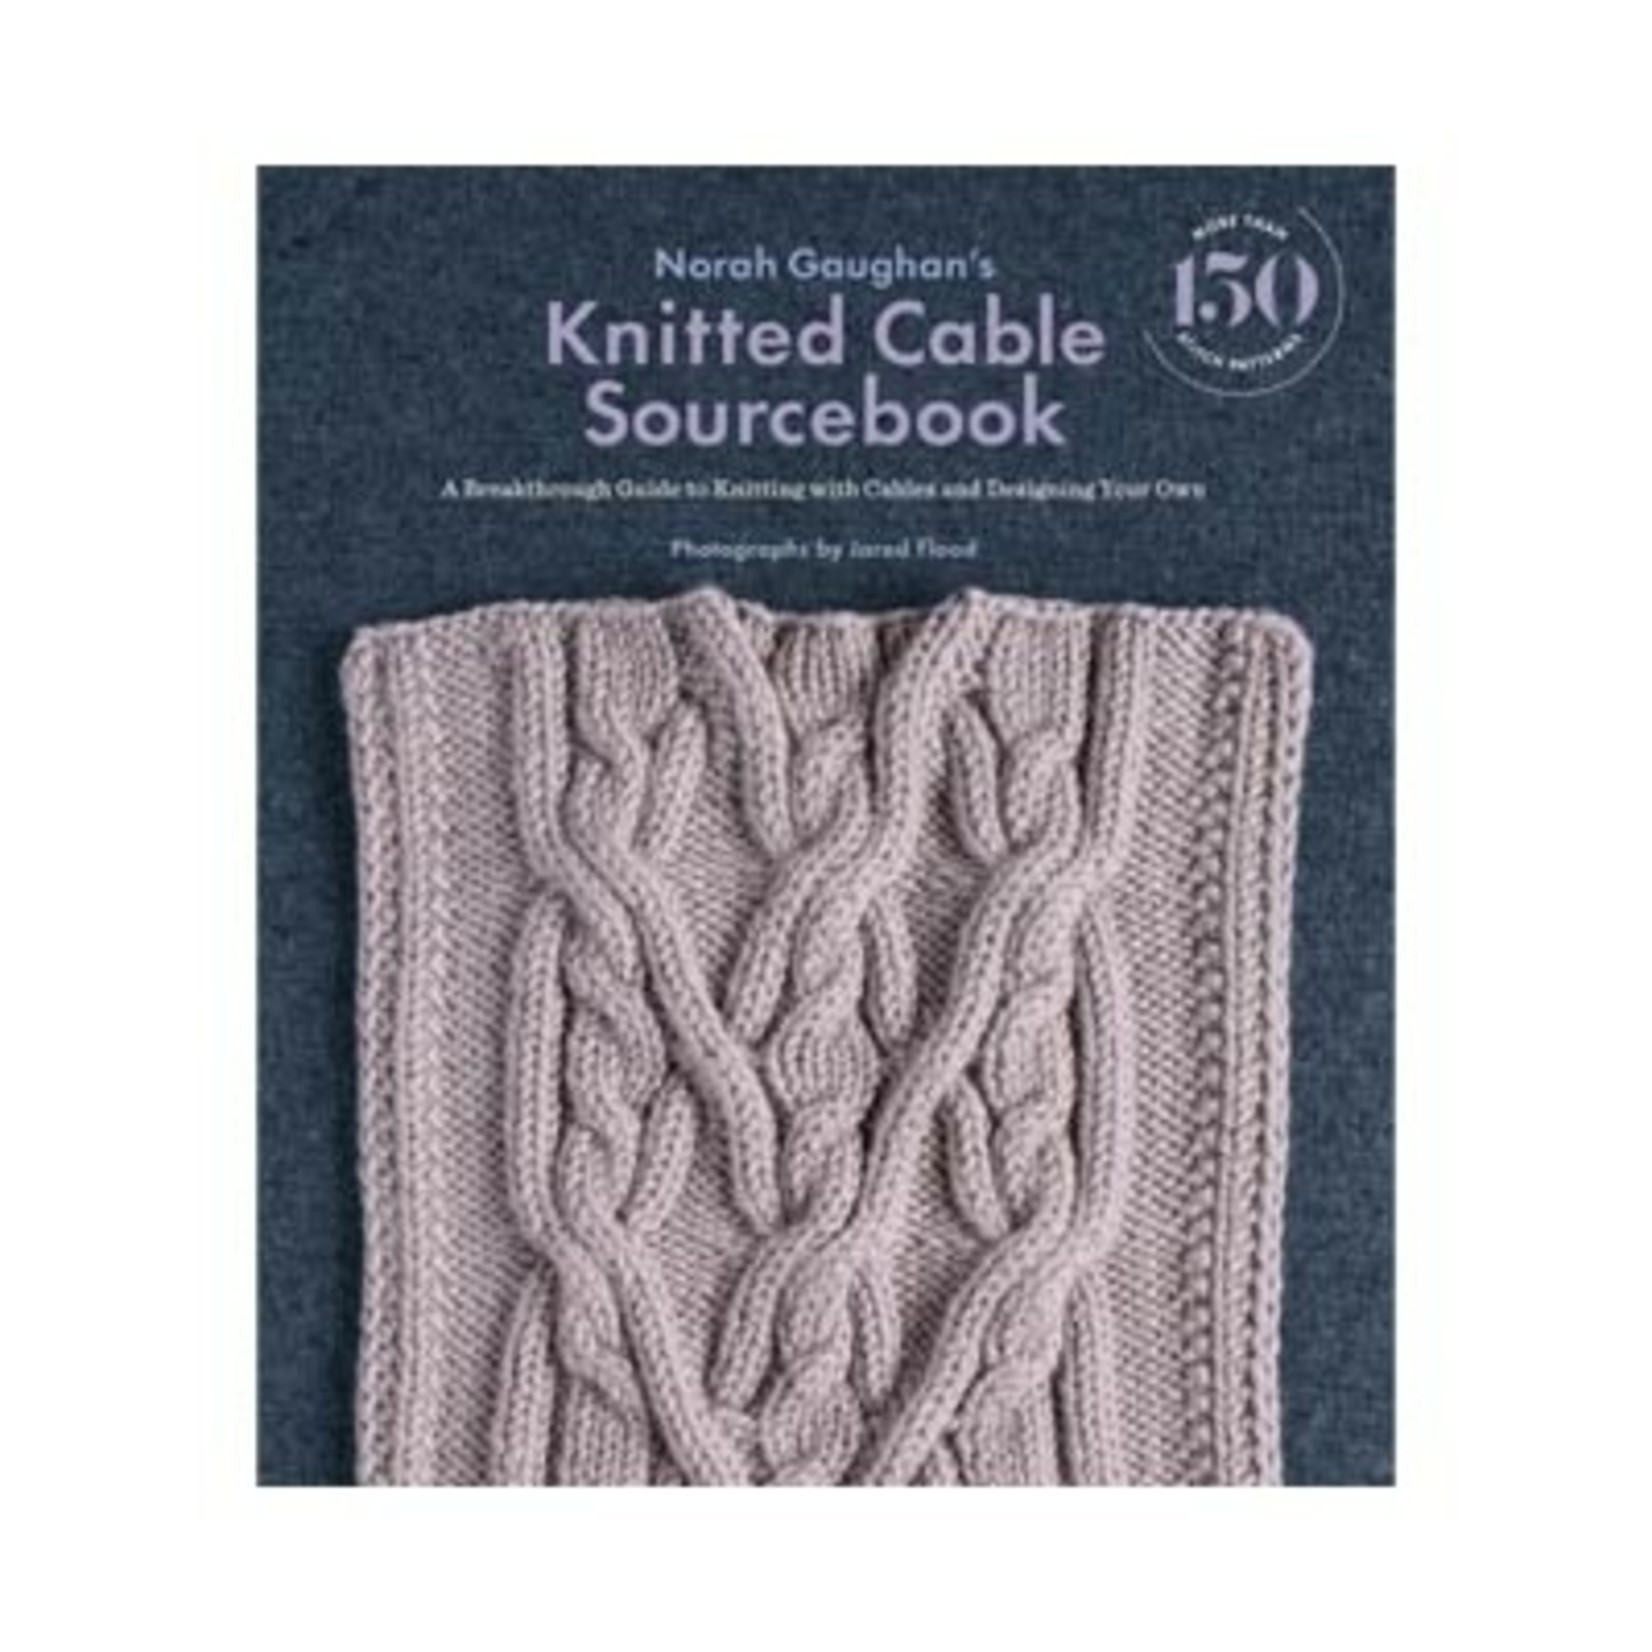 Knitted Cable Sourcebook - Norah Gaughan